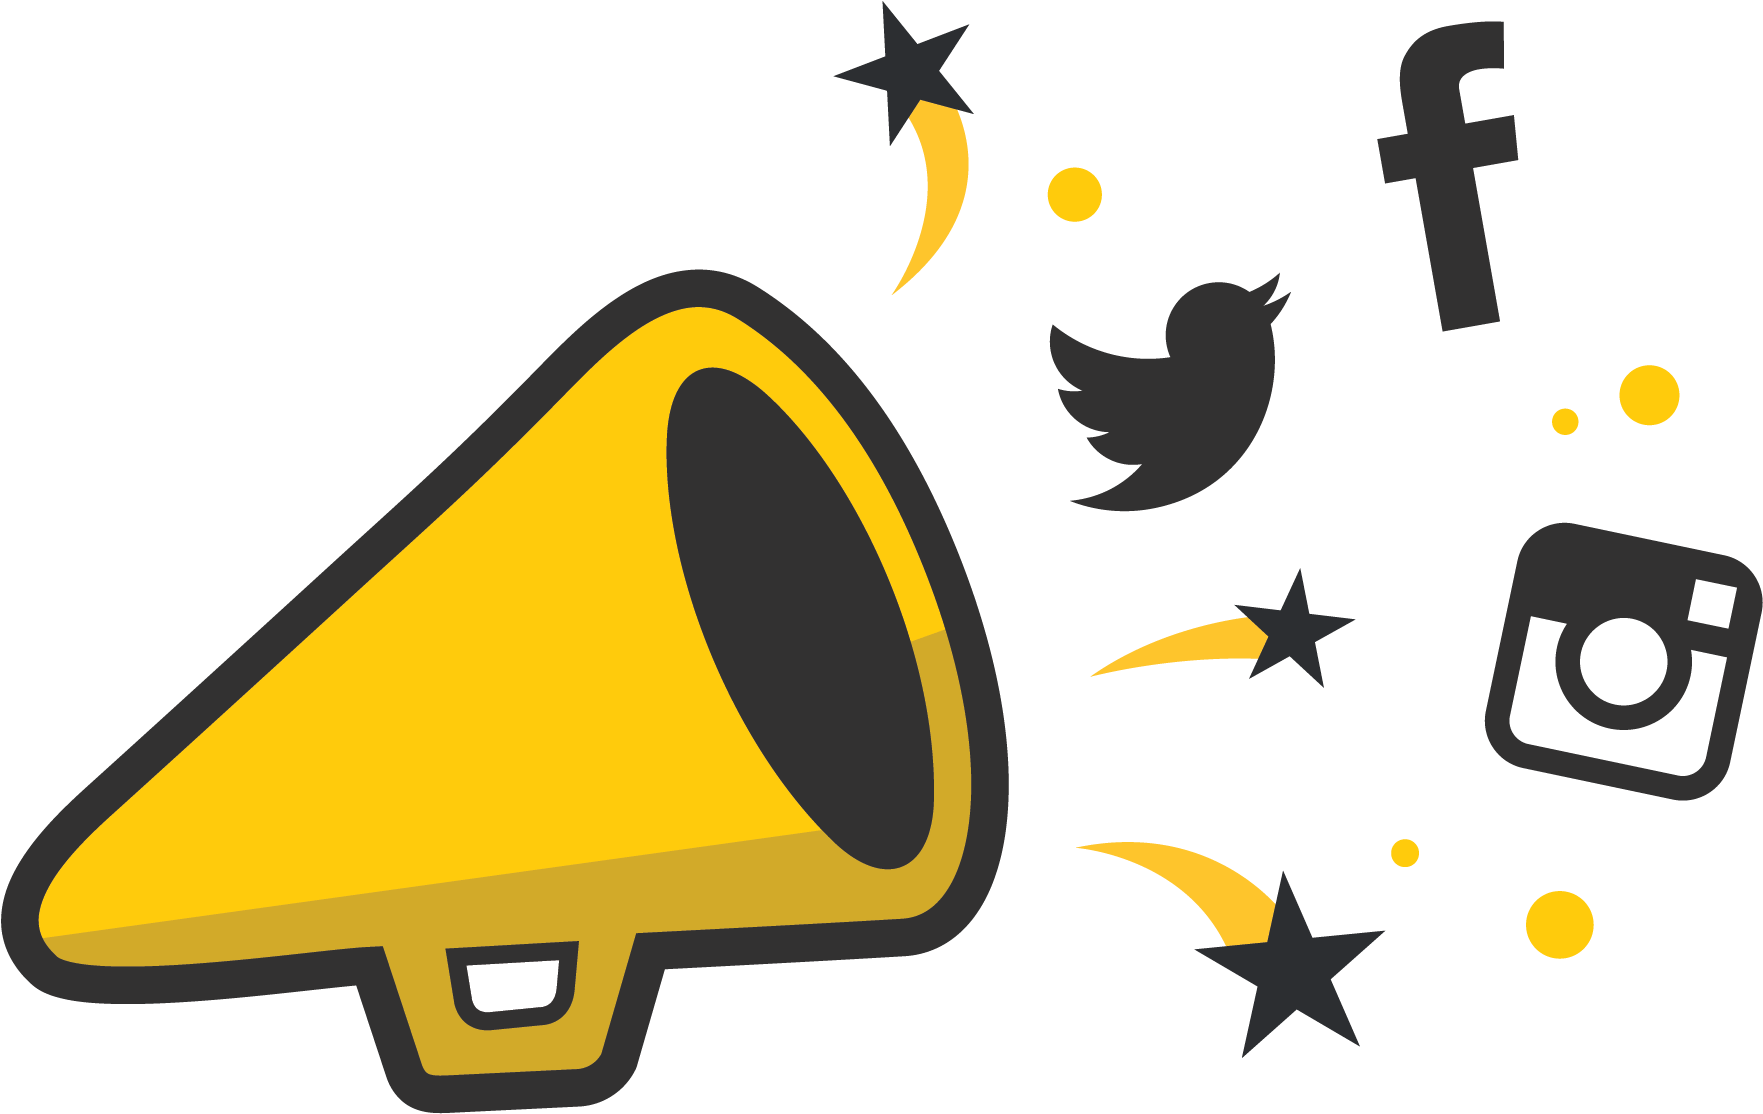 A Yellow Megaphone With Stars And A Black Background